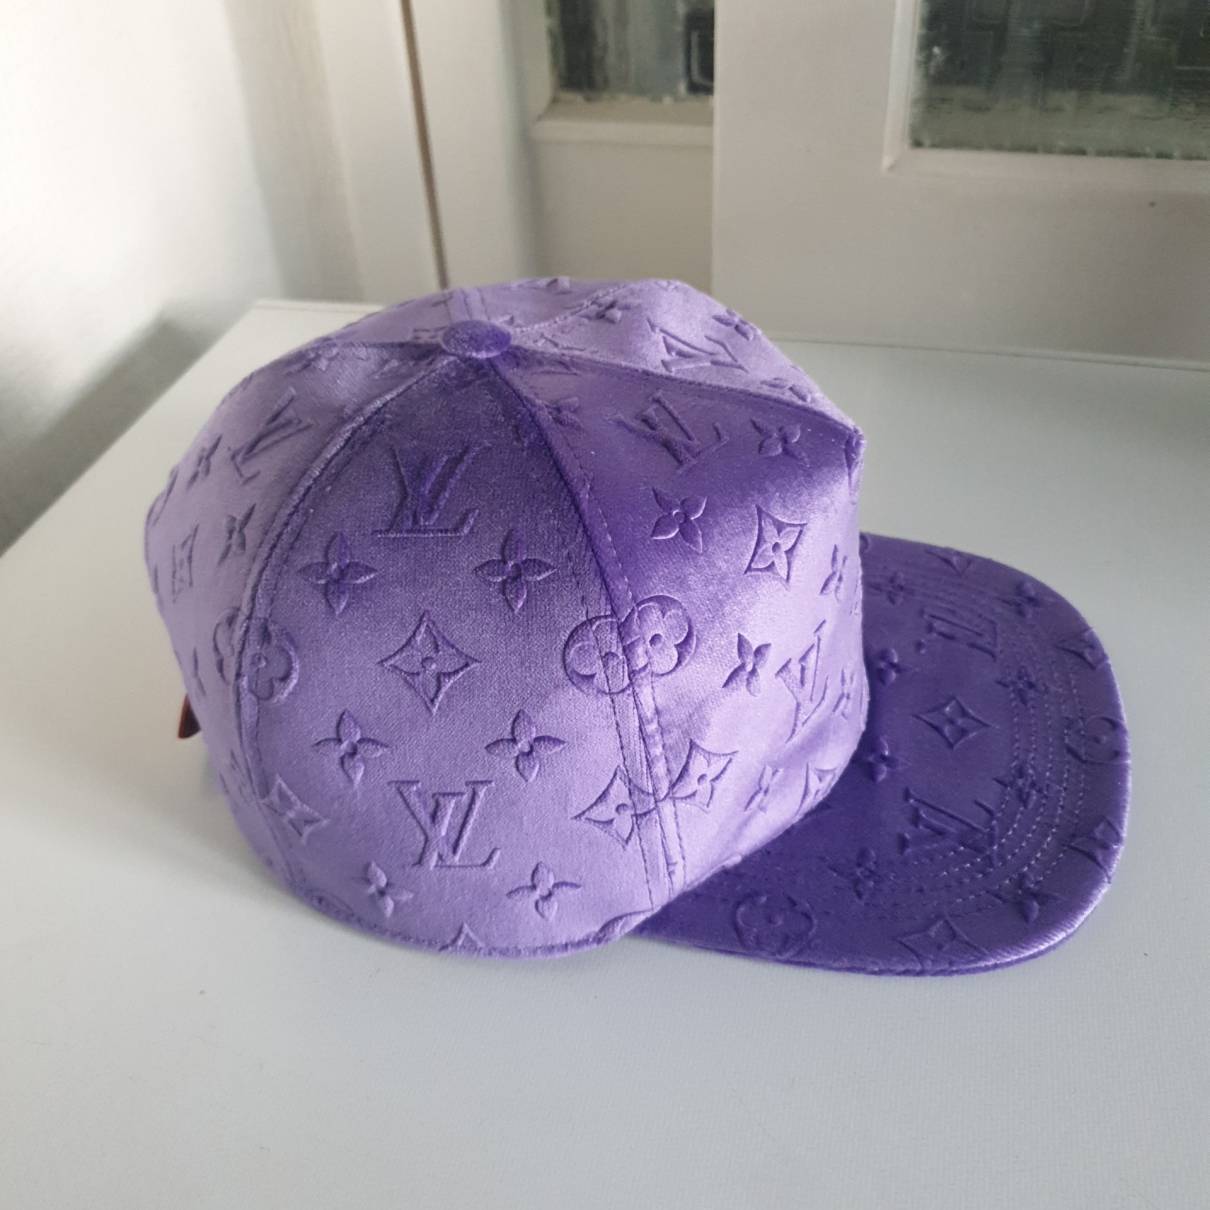 Louis Vuitton - Authenticated Hat - Polyester Purple for Men, Never Worn